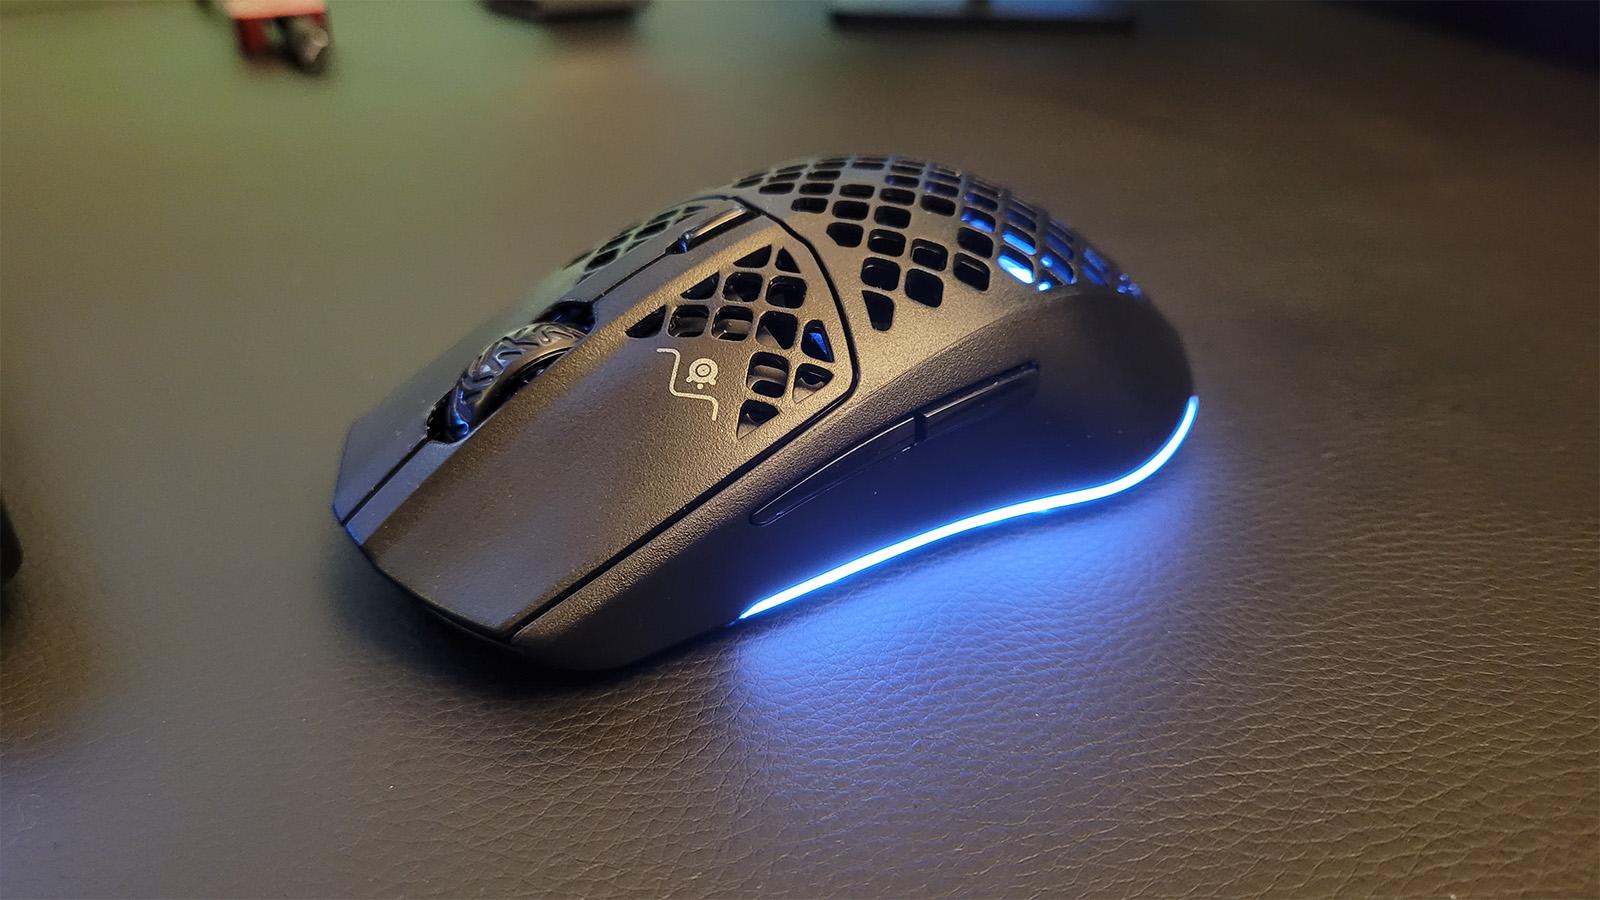 A budget gaming mouse Dexerto 3 fantastic Aerox SteelSeries Wireless - review: